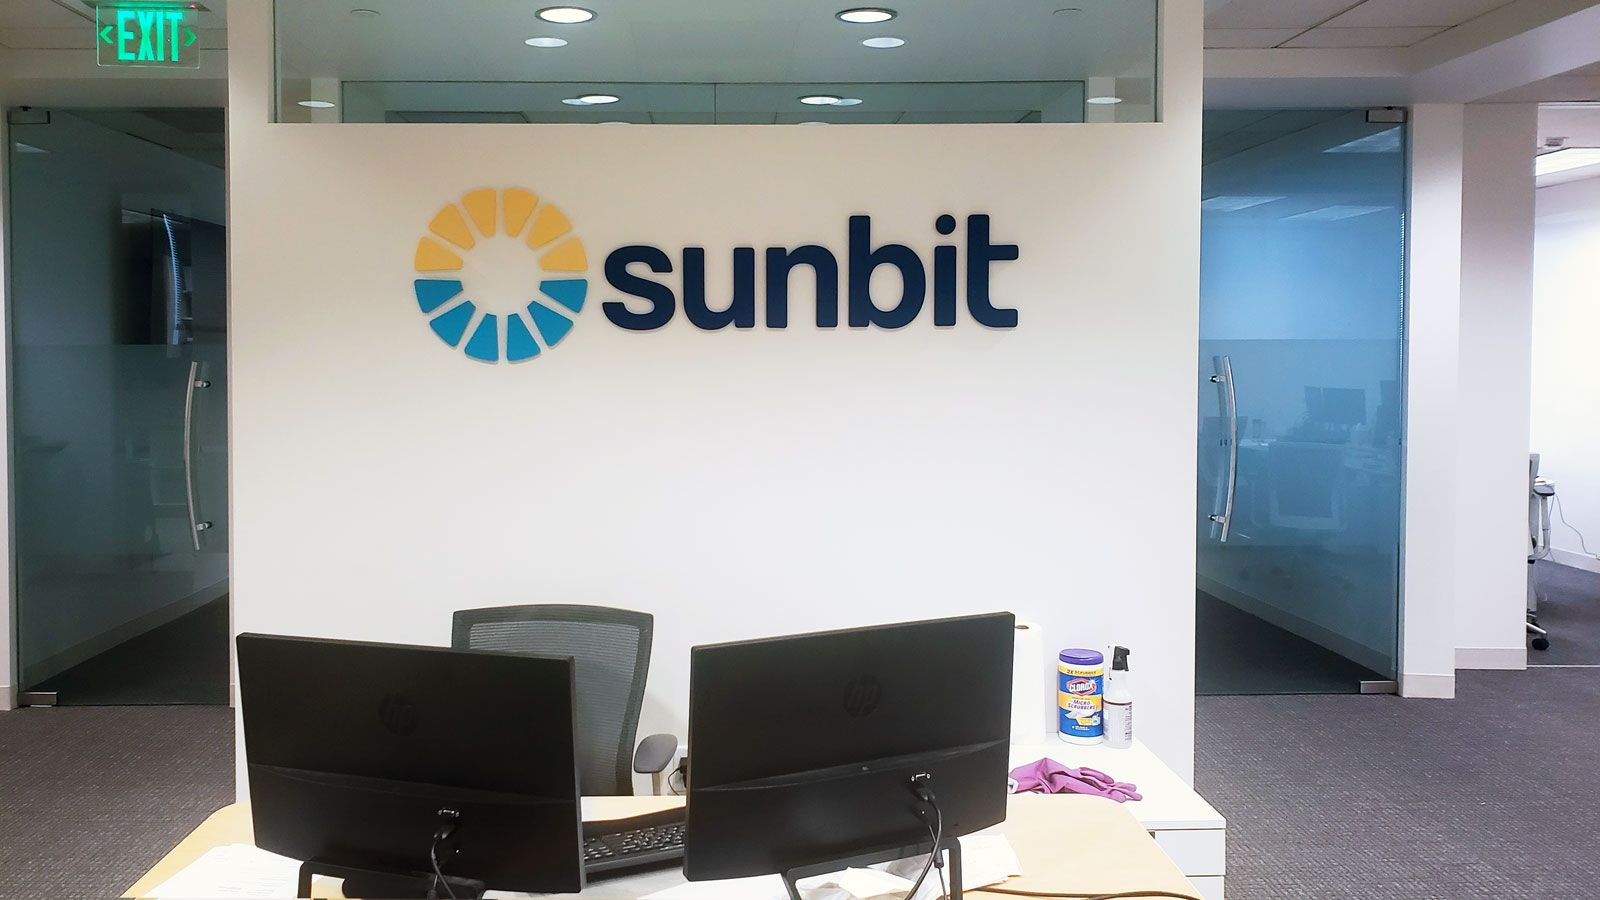 Sunbit 3d office logo sign in bright colors and brand name letters made of acrylic